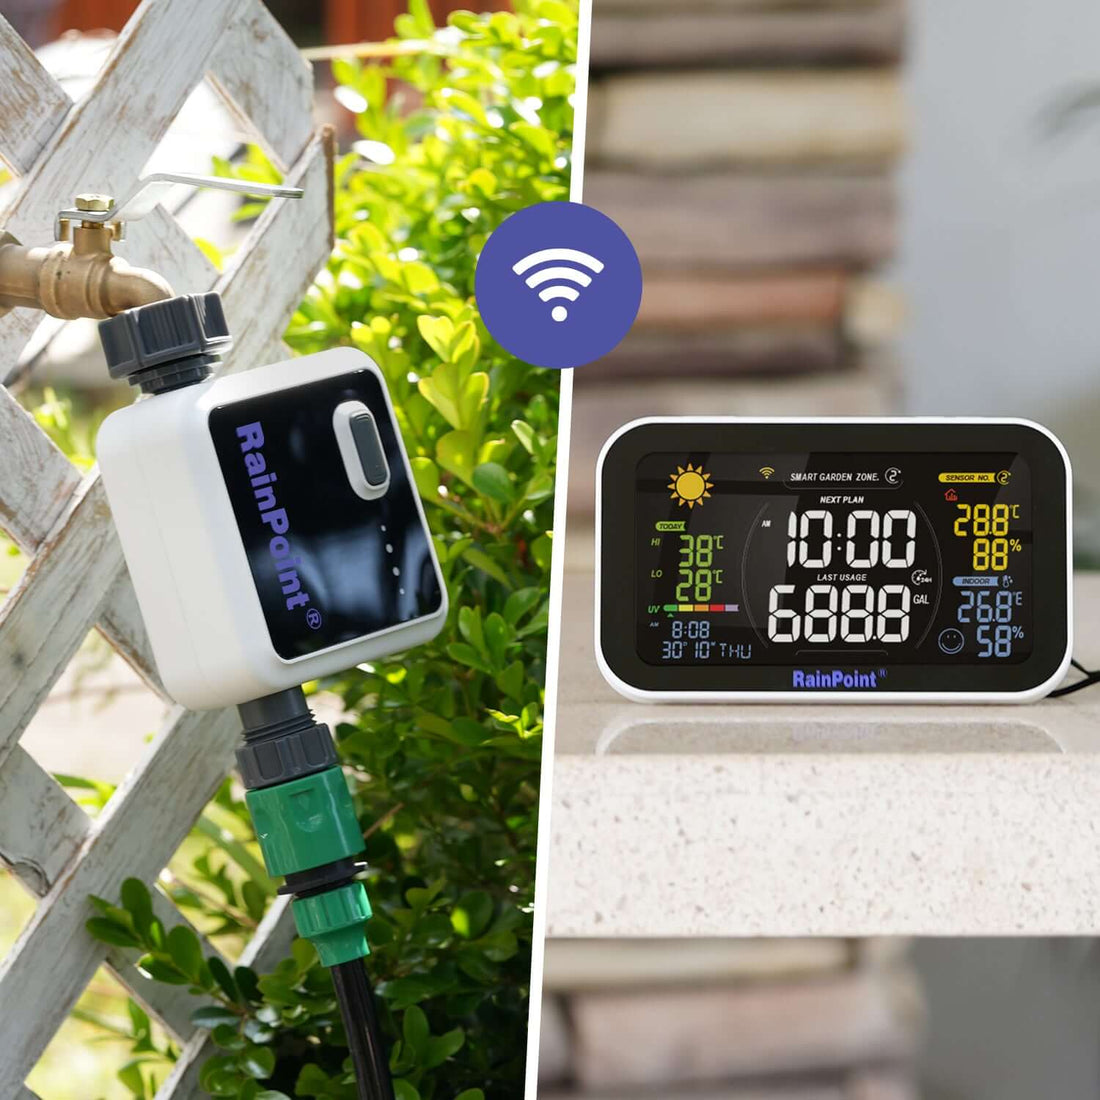 RAINPOINT WiFi Sprinkler Timer Water Timer for Garden Hose, Smart Hose Faucet Timer, Automatic Irrigation System Controller, APP Control via 2.4Ghz WiFi Voice Control for Yard Lawn Watering